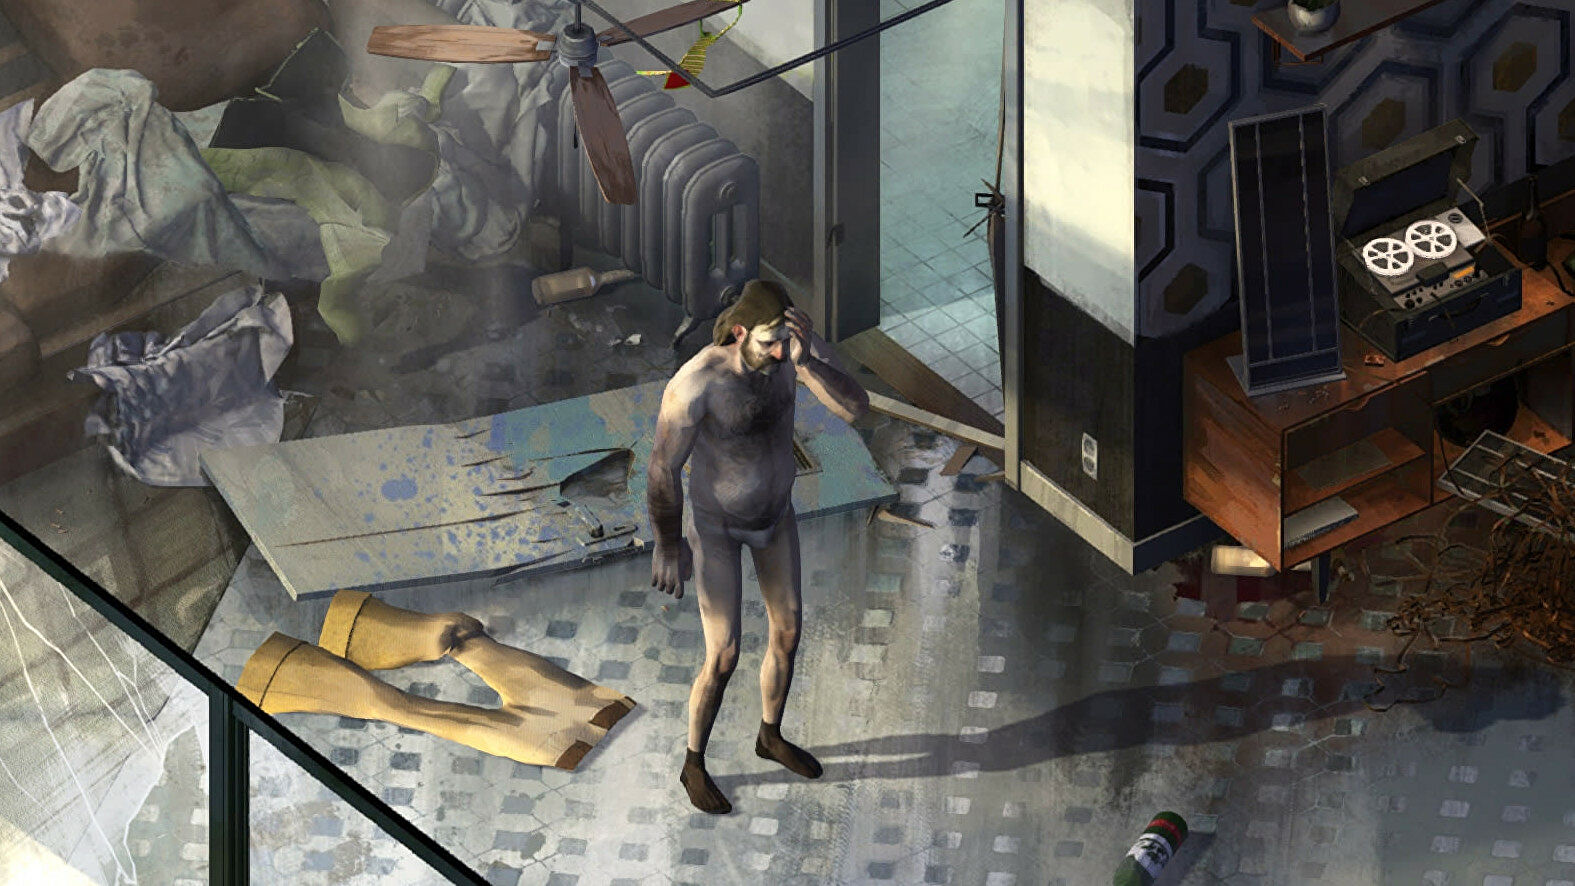 Disco Elysium studio says former employees were fired for “egregious misconduct”